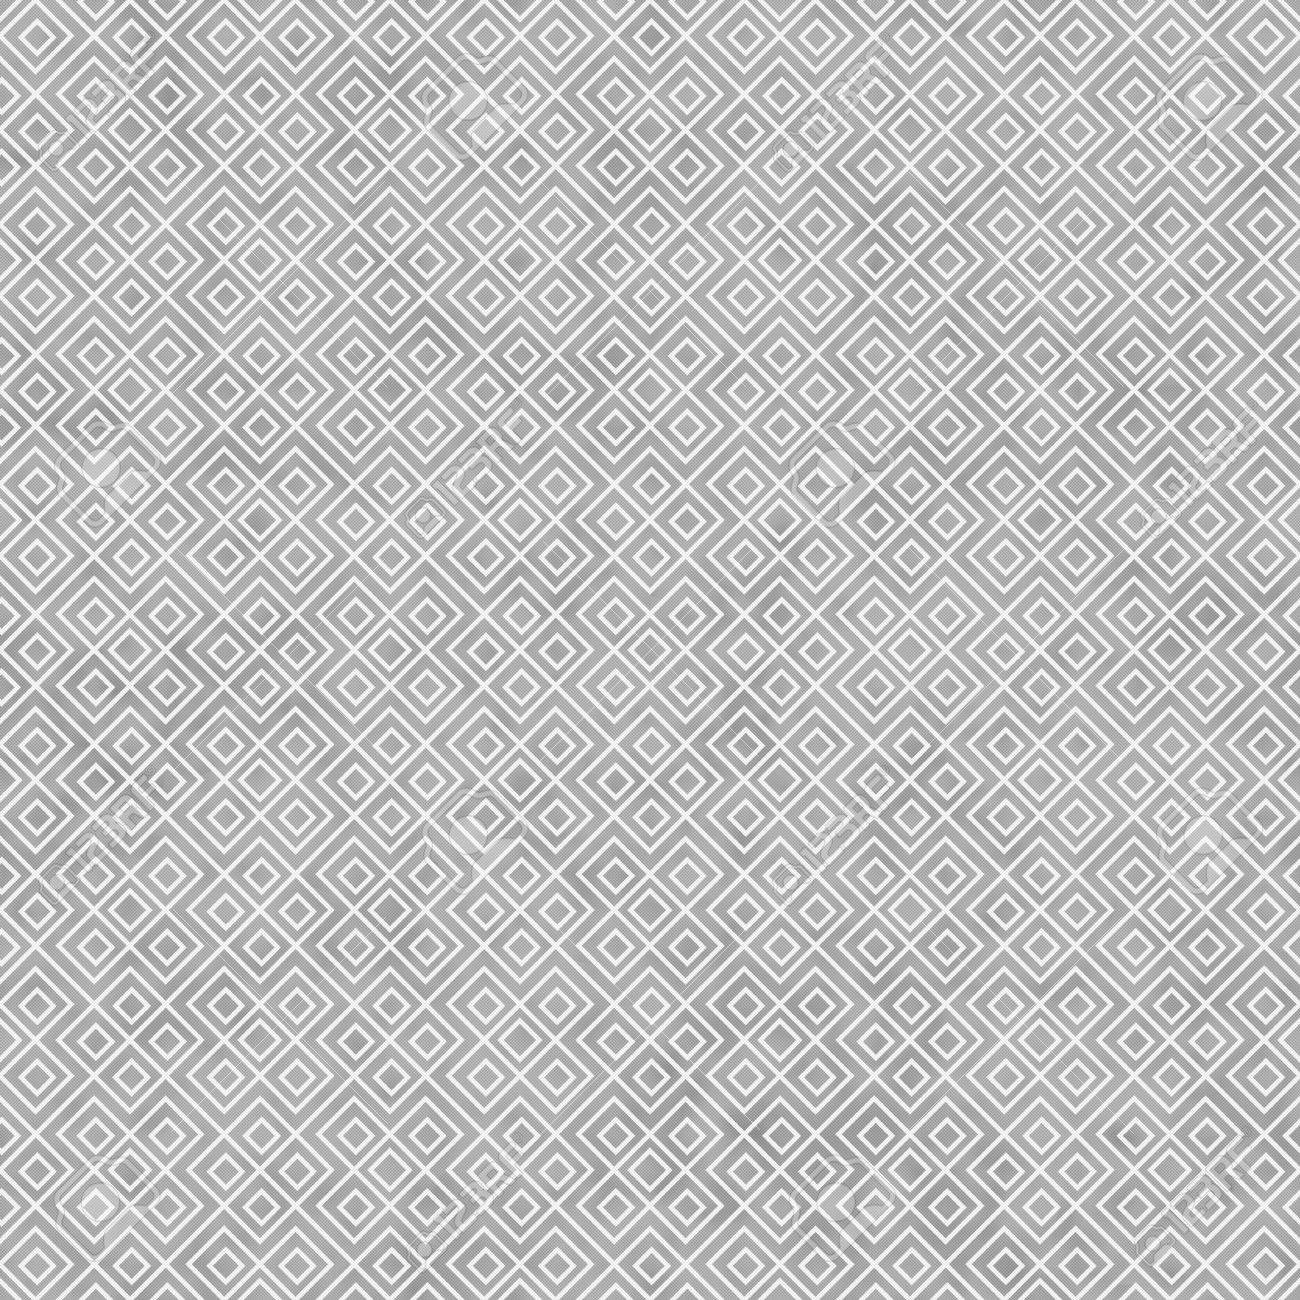 Gray And White Square Geometric Repeat Pattern Background That